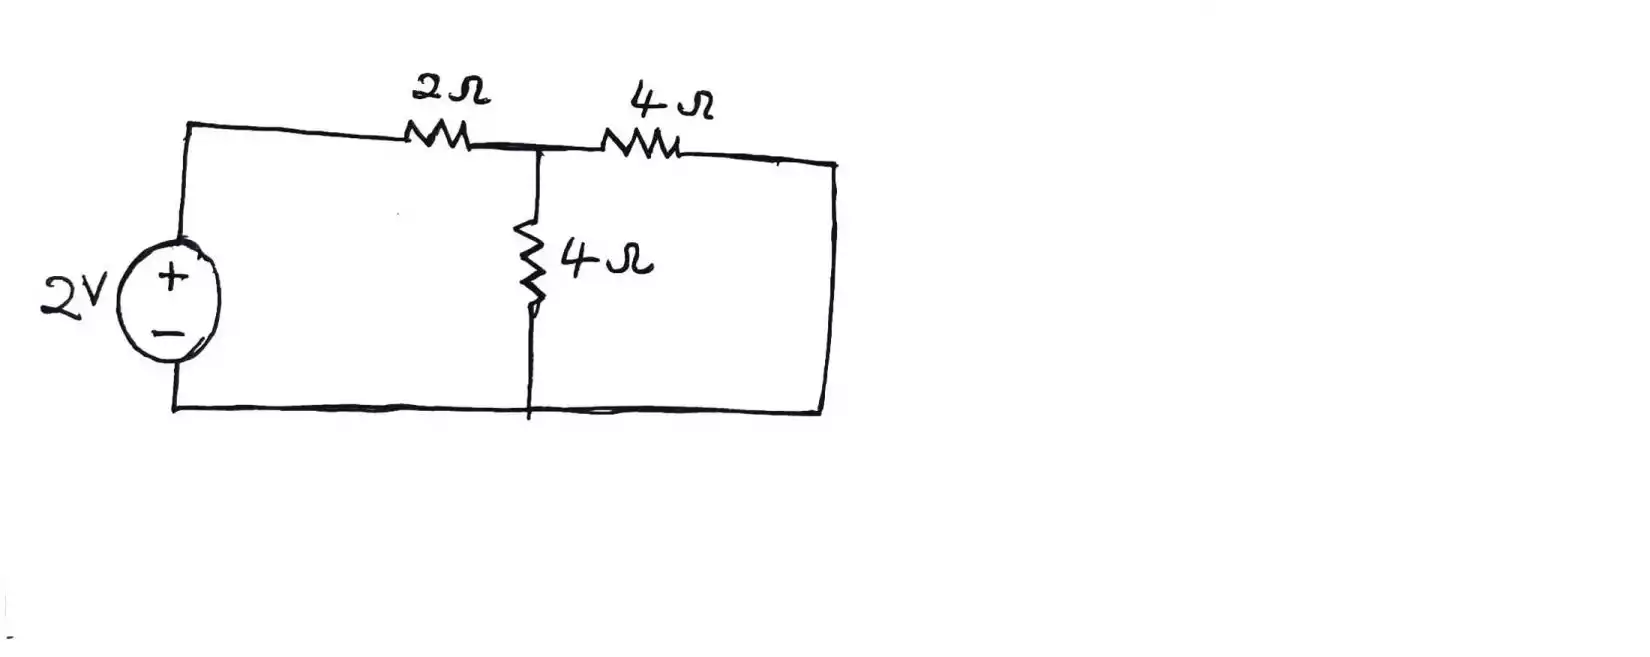 kirchhoff's law example problem